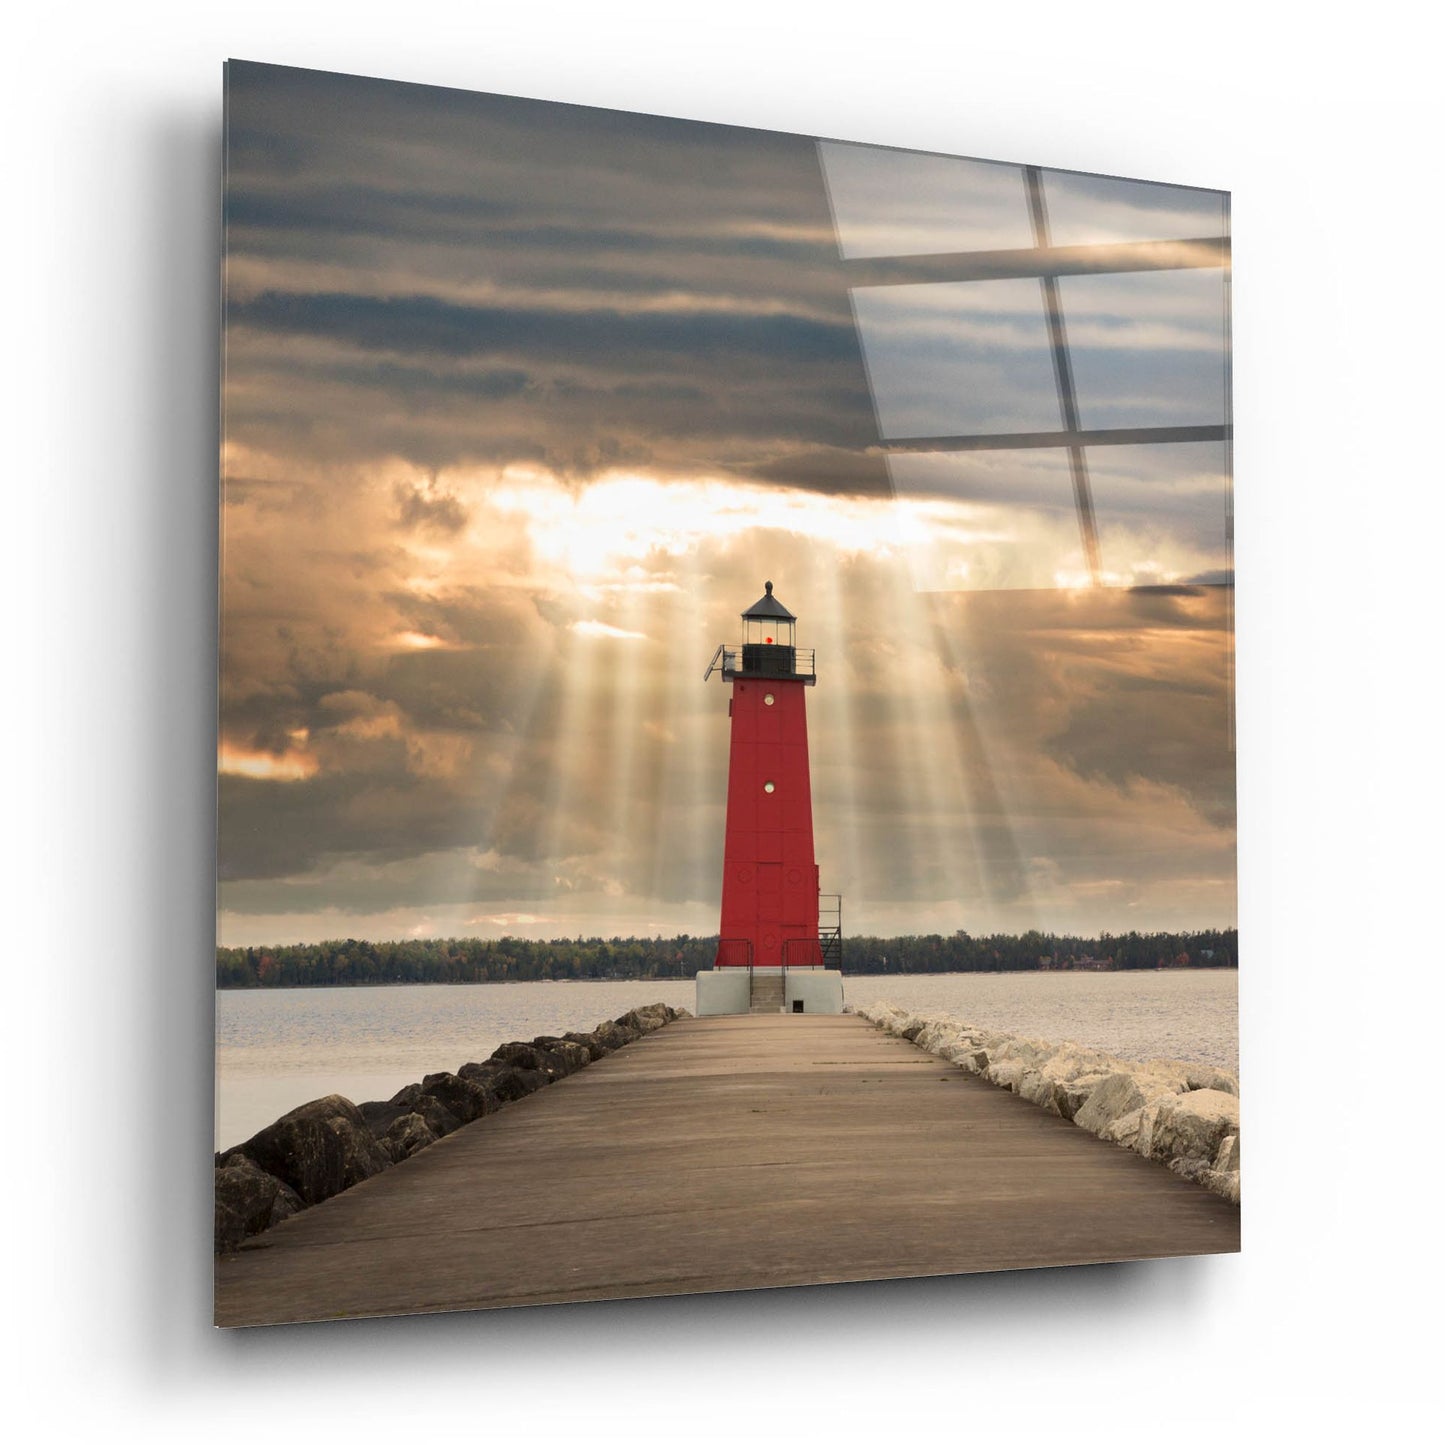 Epic Art 'Manistique Lighthouse & Sunbeams, Michigan 14' by Monte Nagler, Acrylic Glass Wall Art,12x12